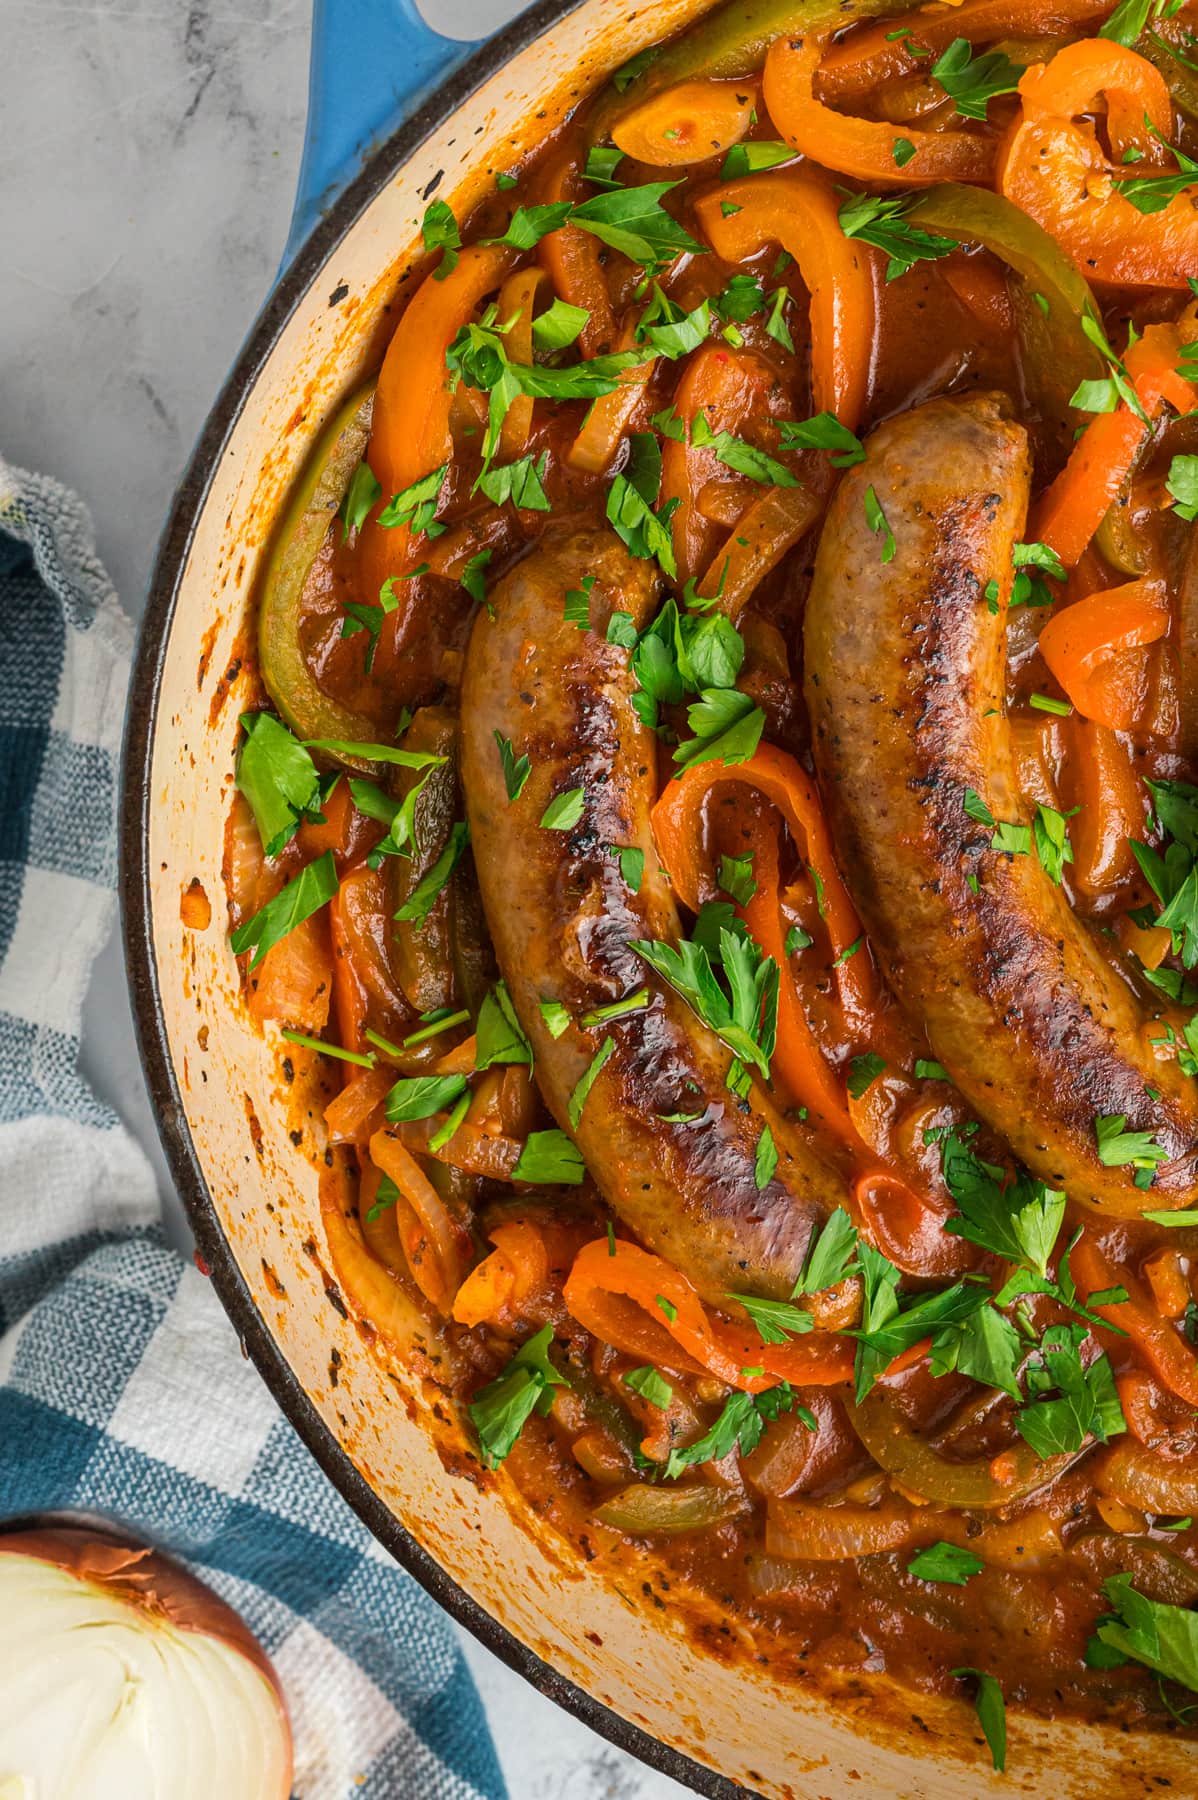 Overhead view of Italian Sausage and peppers in a pan